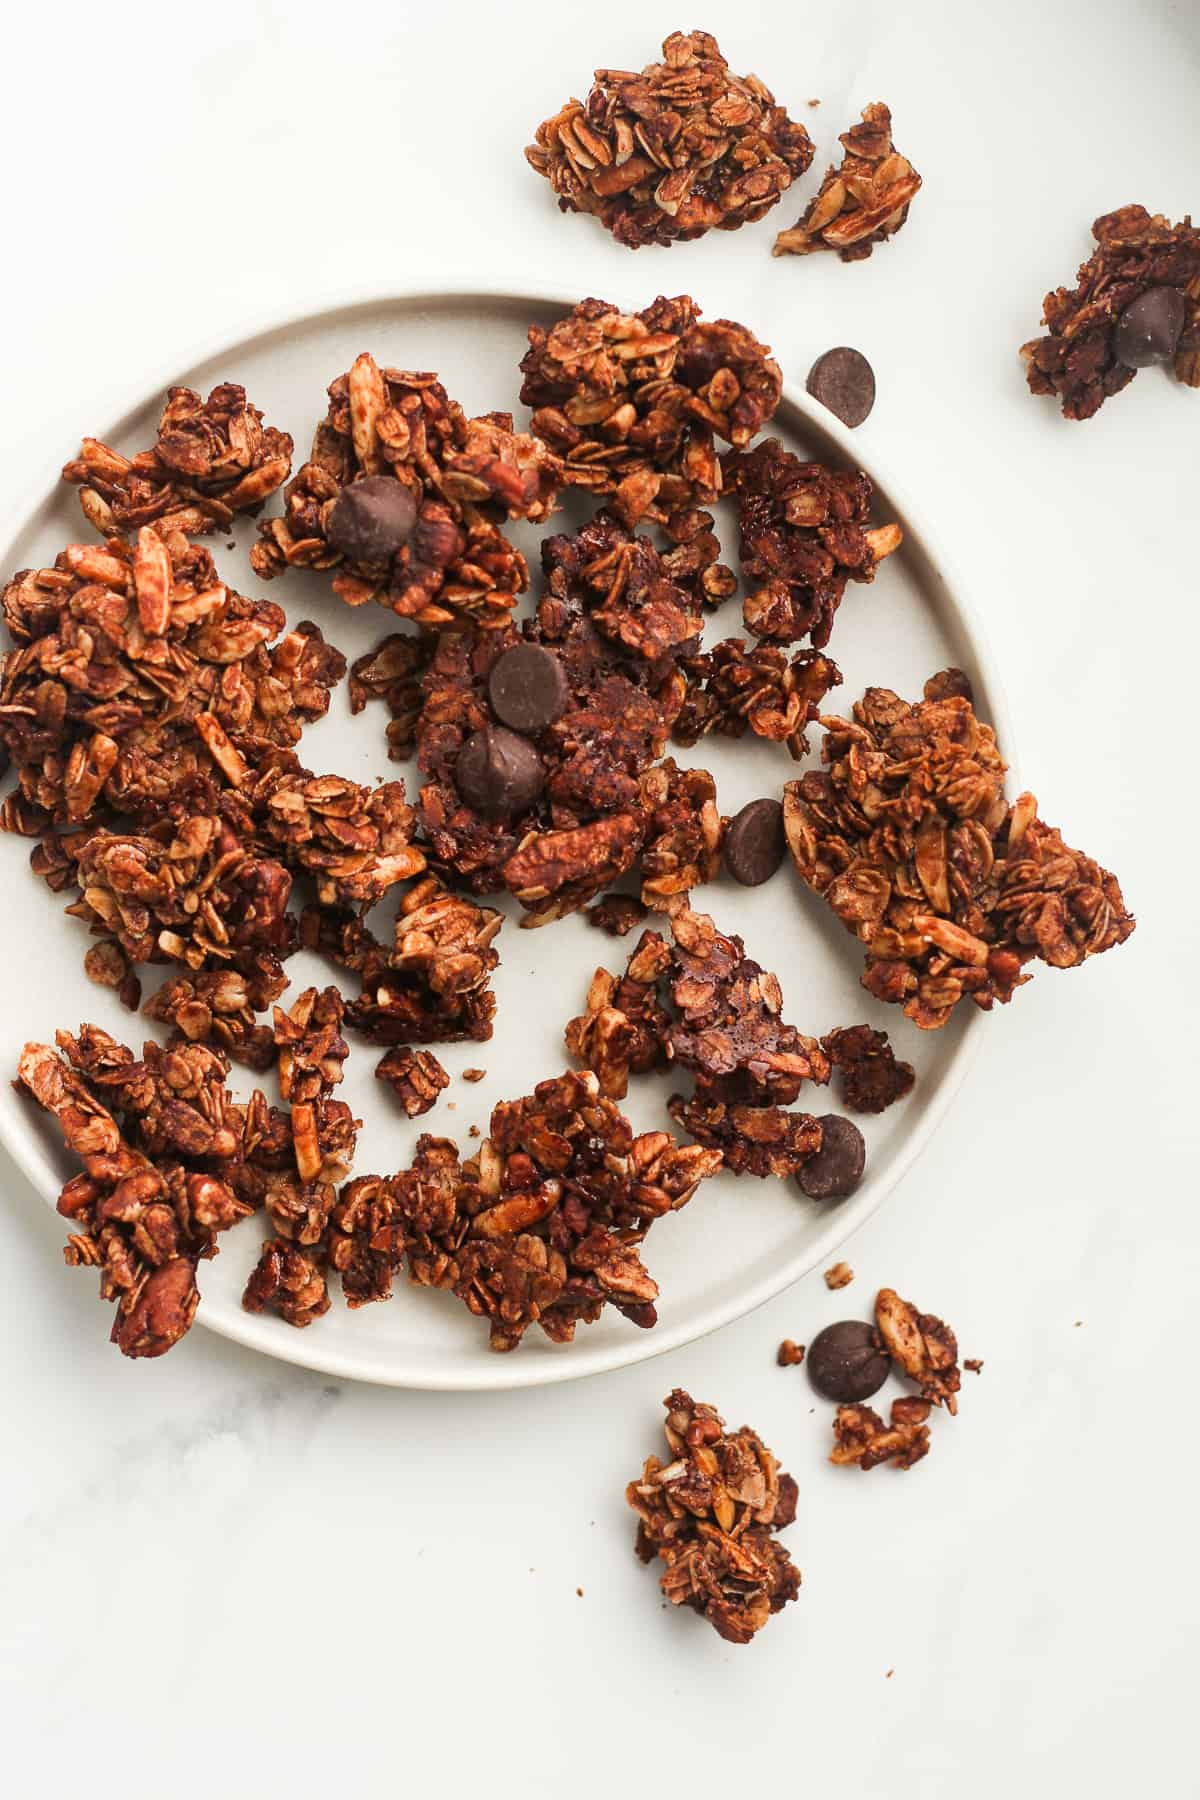 A plate of chocolate granola clusters.